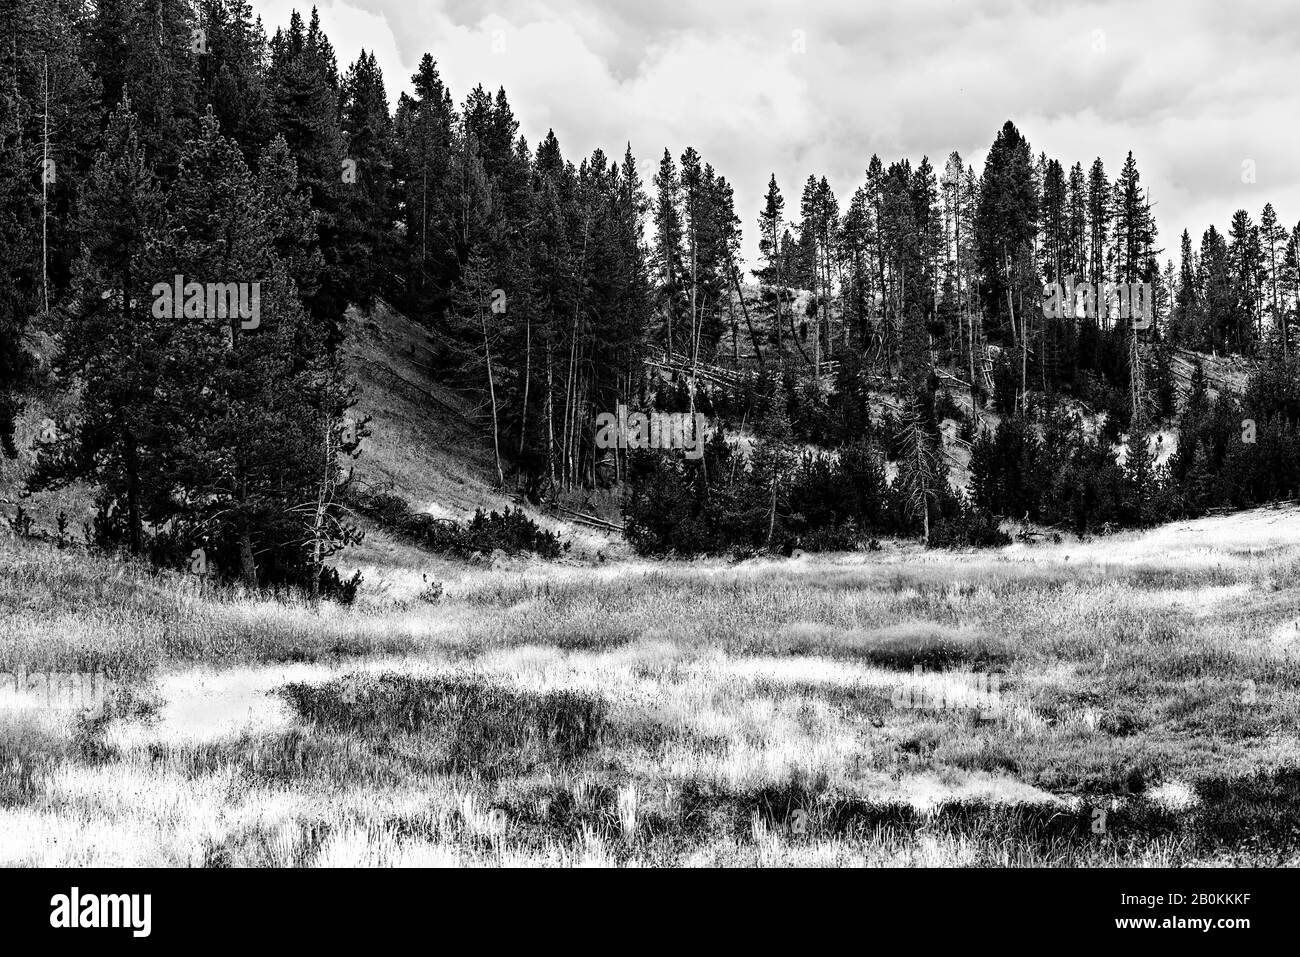 Black and white, grassy fields with tall pine trees on hillside. Stock Photo